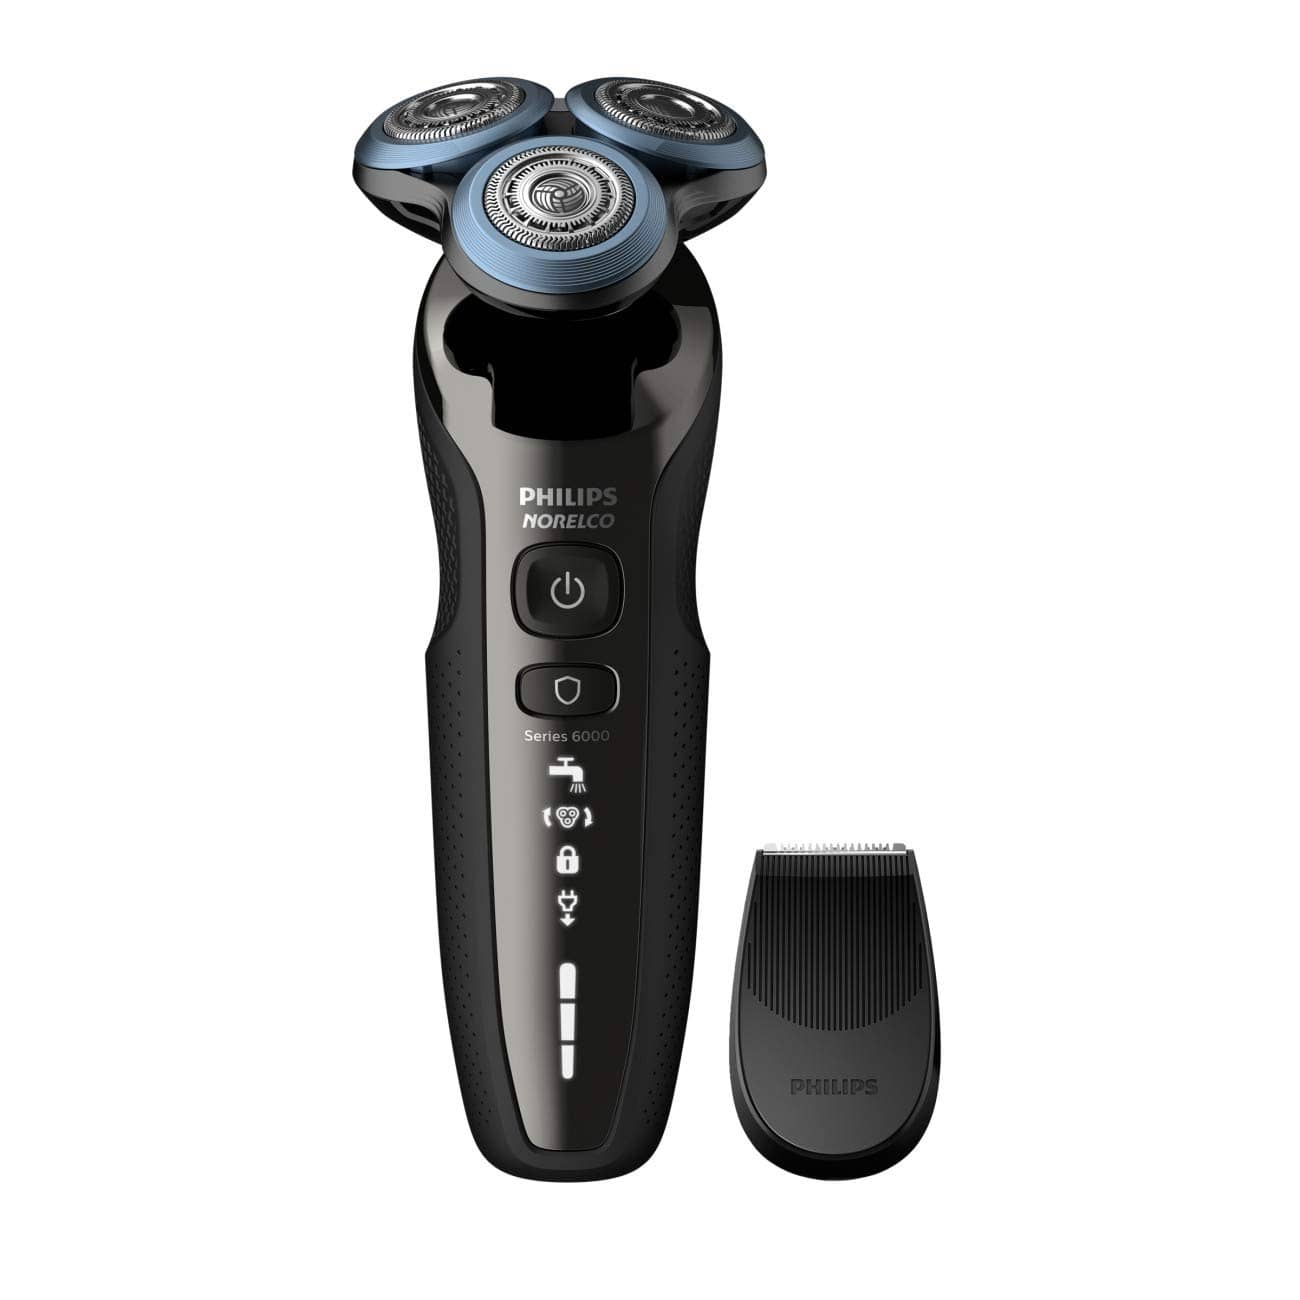 Philips Norelco 6880/81 Shaver 6800 Best bald head shaver for African American